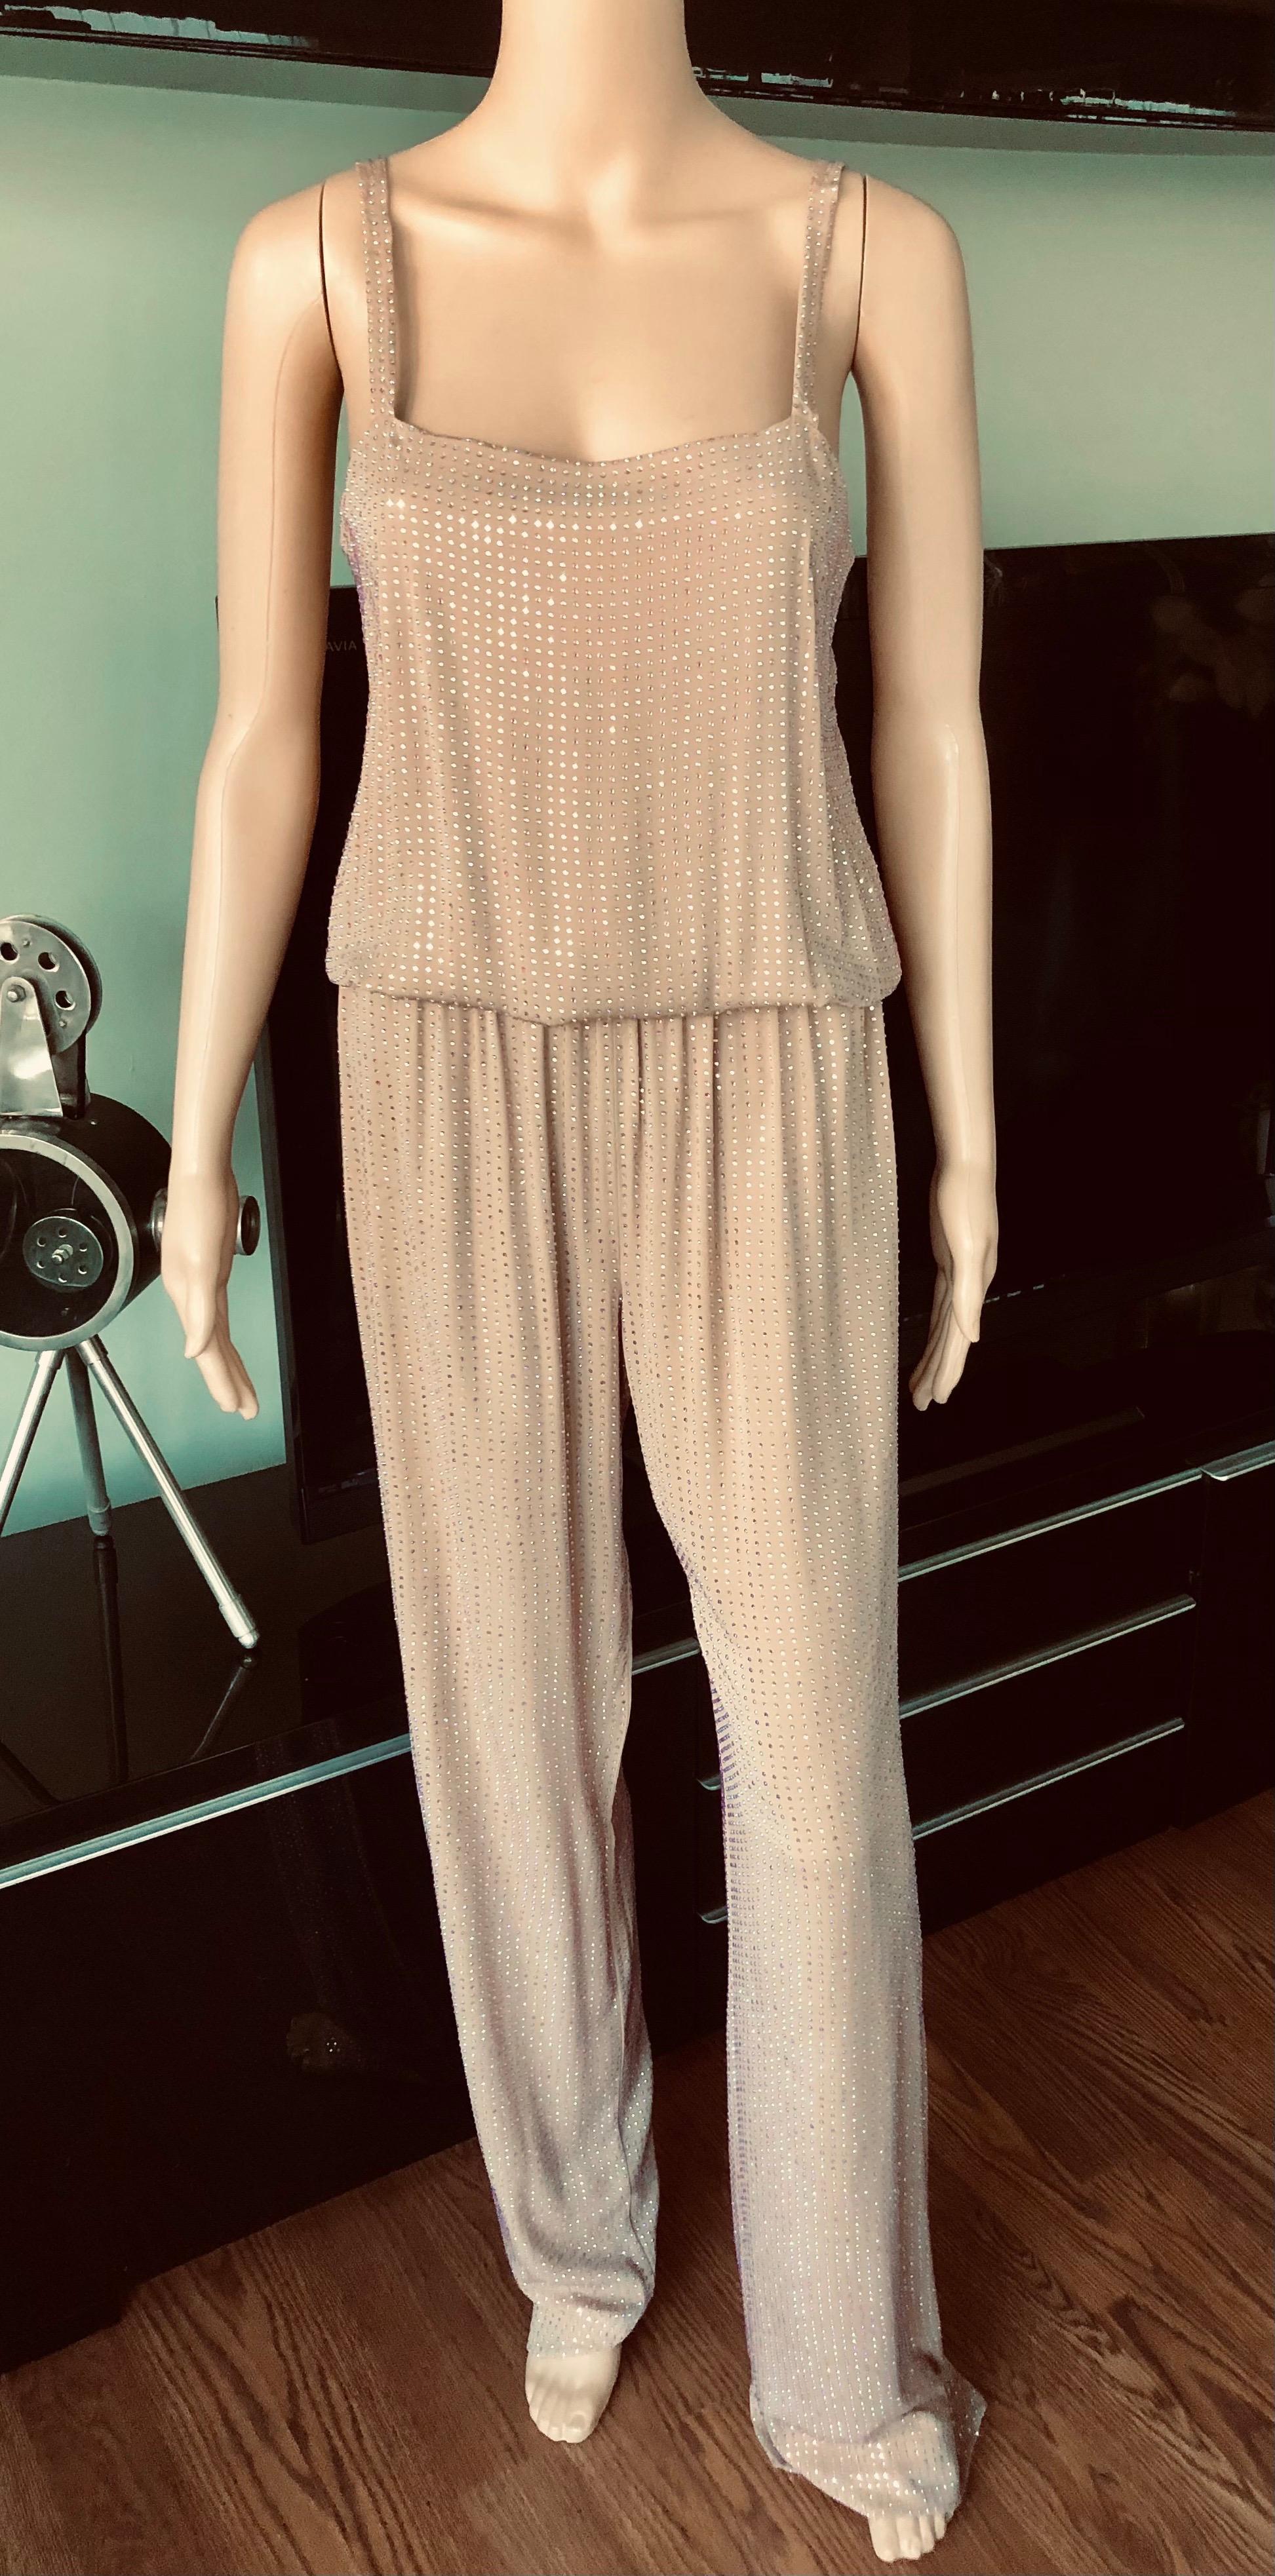 Gucci Crystal Embellished Silk Jumpsuit IT 40

Excellent Condition!

Gucci peach crystal embellished jumpsuit featuring gold-tone hardware at waist and button closure at back.